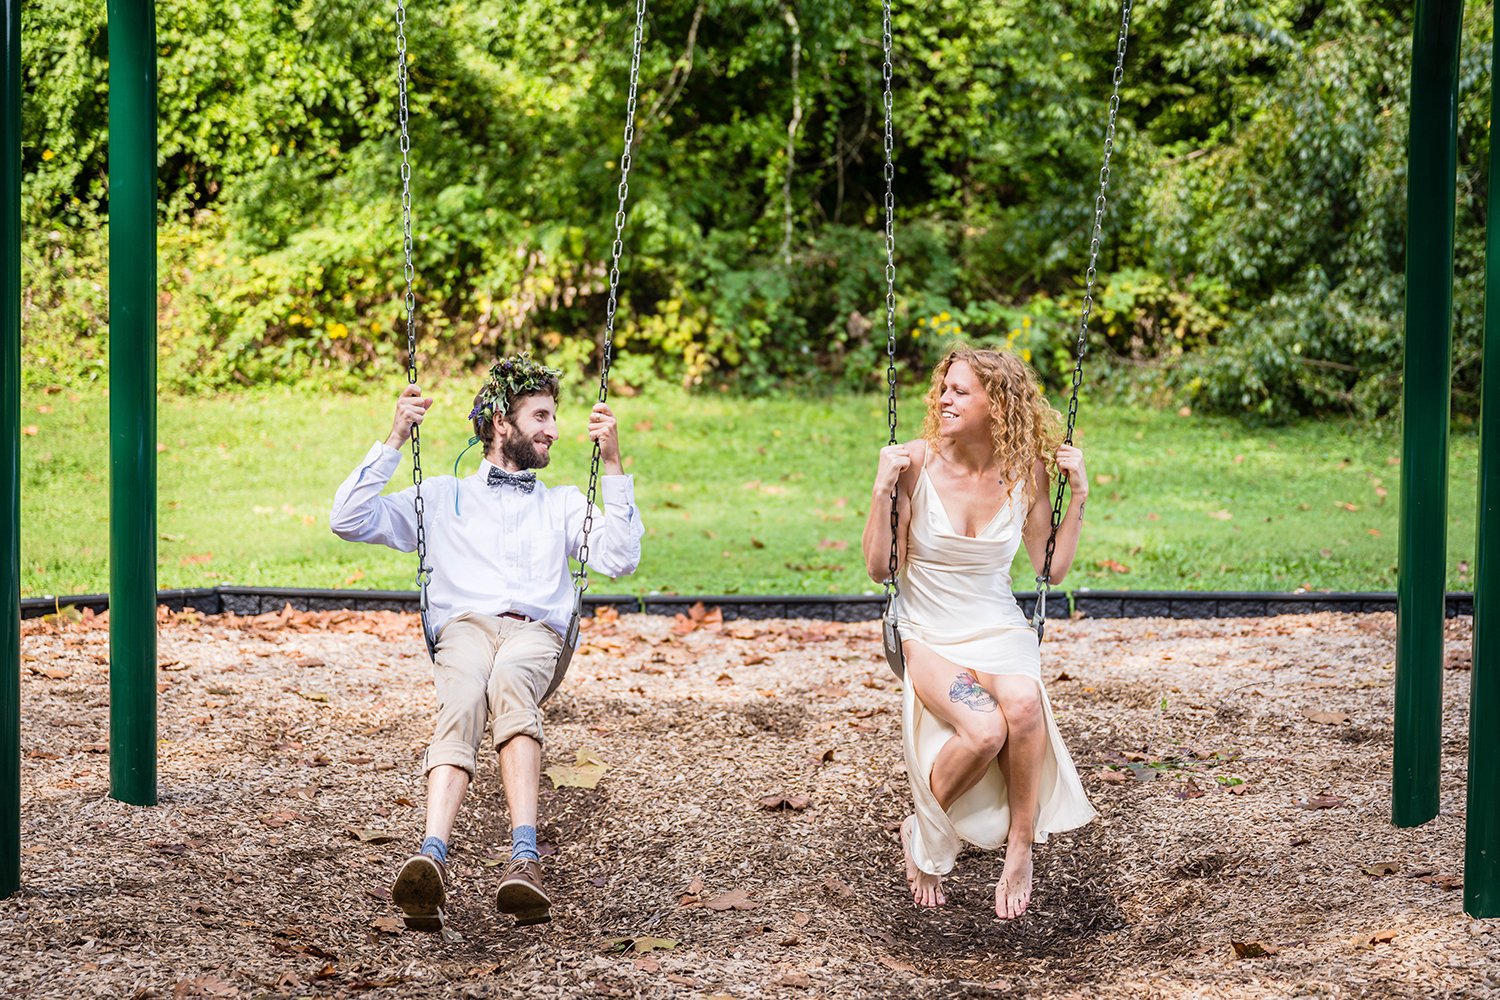 A bride and groom swing on a swing set at a playground at Fishburn Park in Roanoke, Virginia during their elopement.